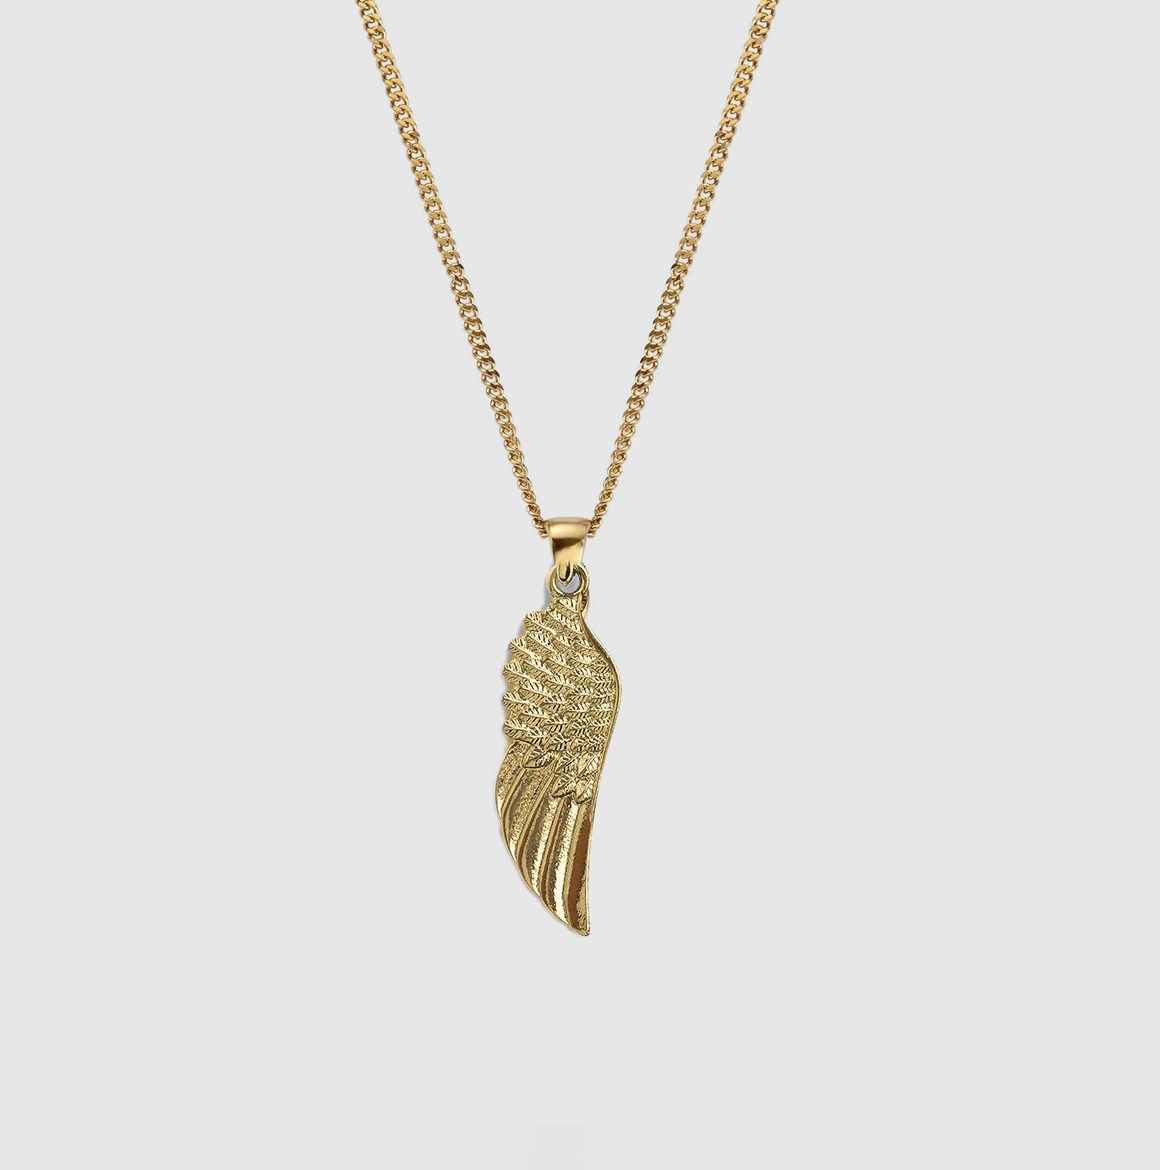 54 FLORAL WING FEATHER PENDANT NECKLACE CHAIN